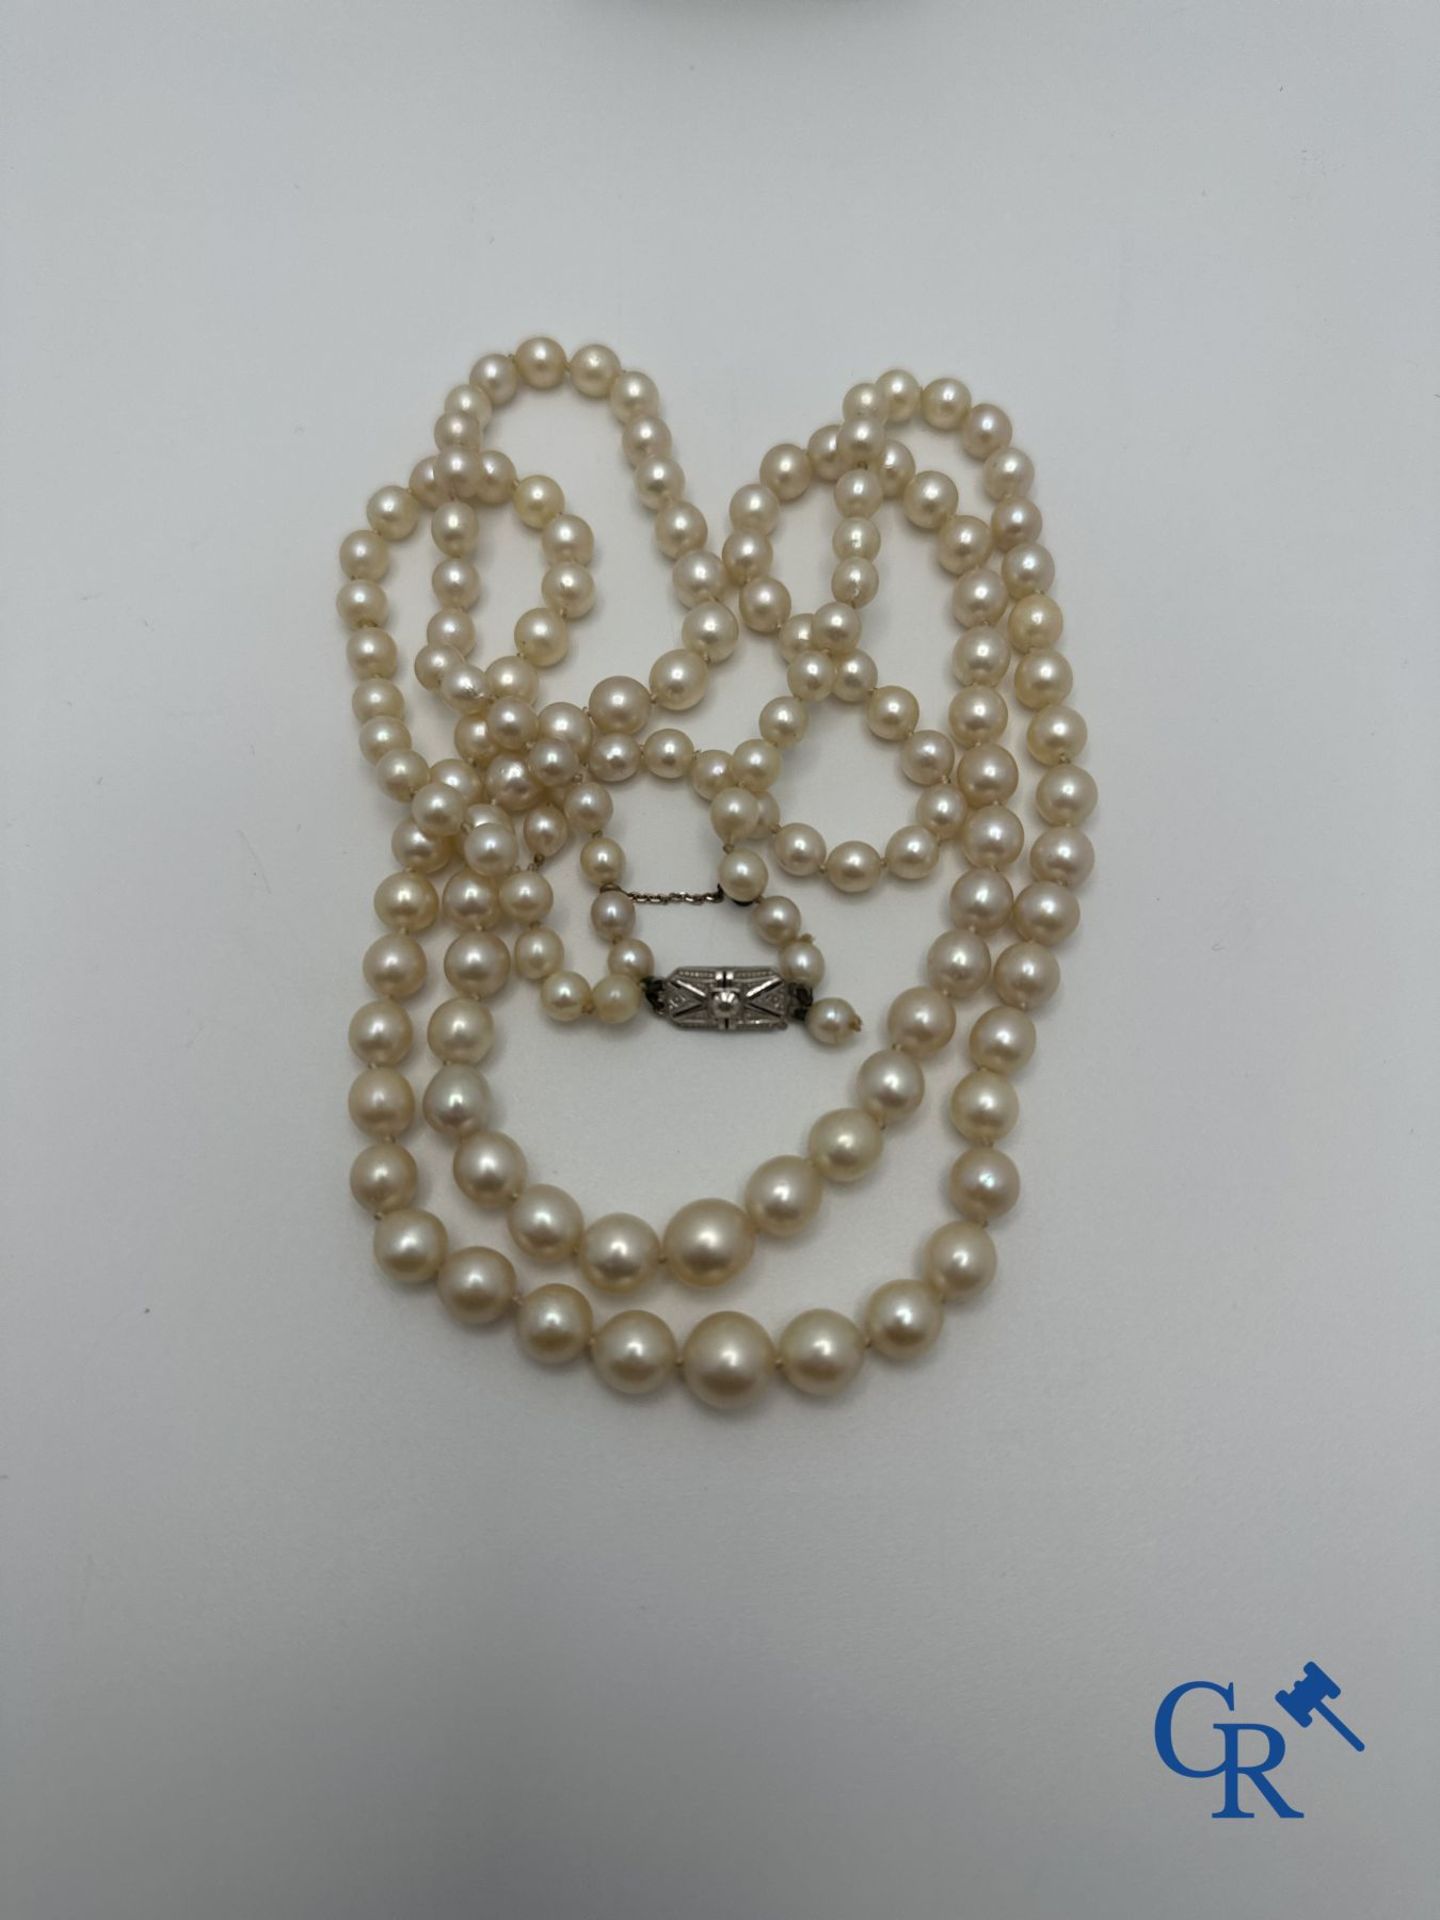 Jewellery: Lot consisting of a pearl necklace with gold clasp 18K and a pair of earrings in white go - Image 3 of 5